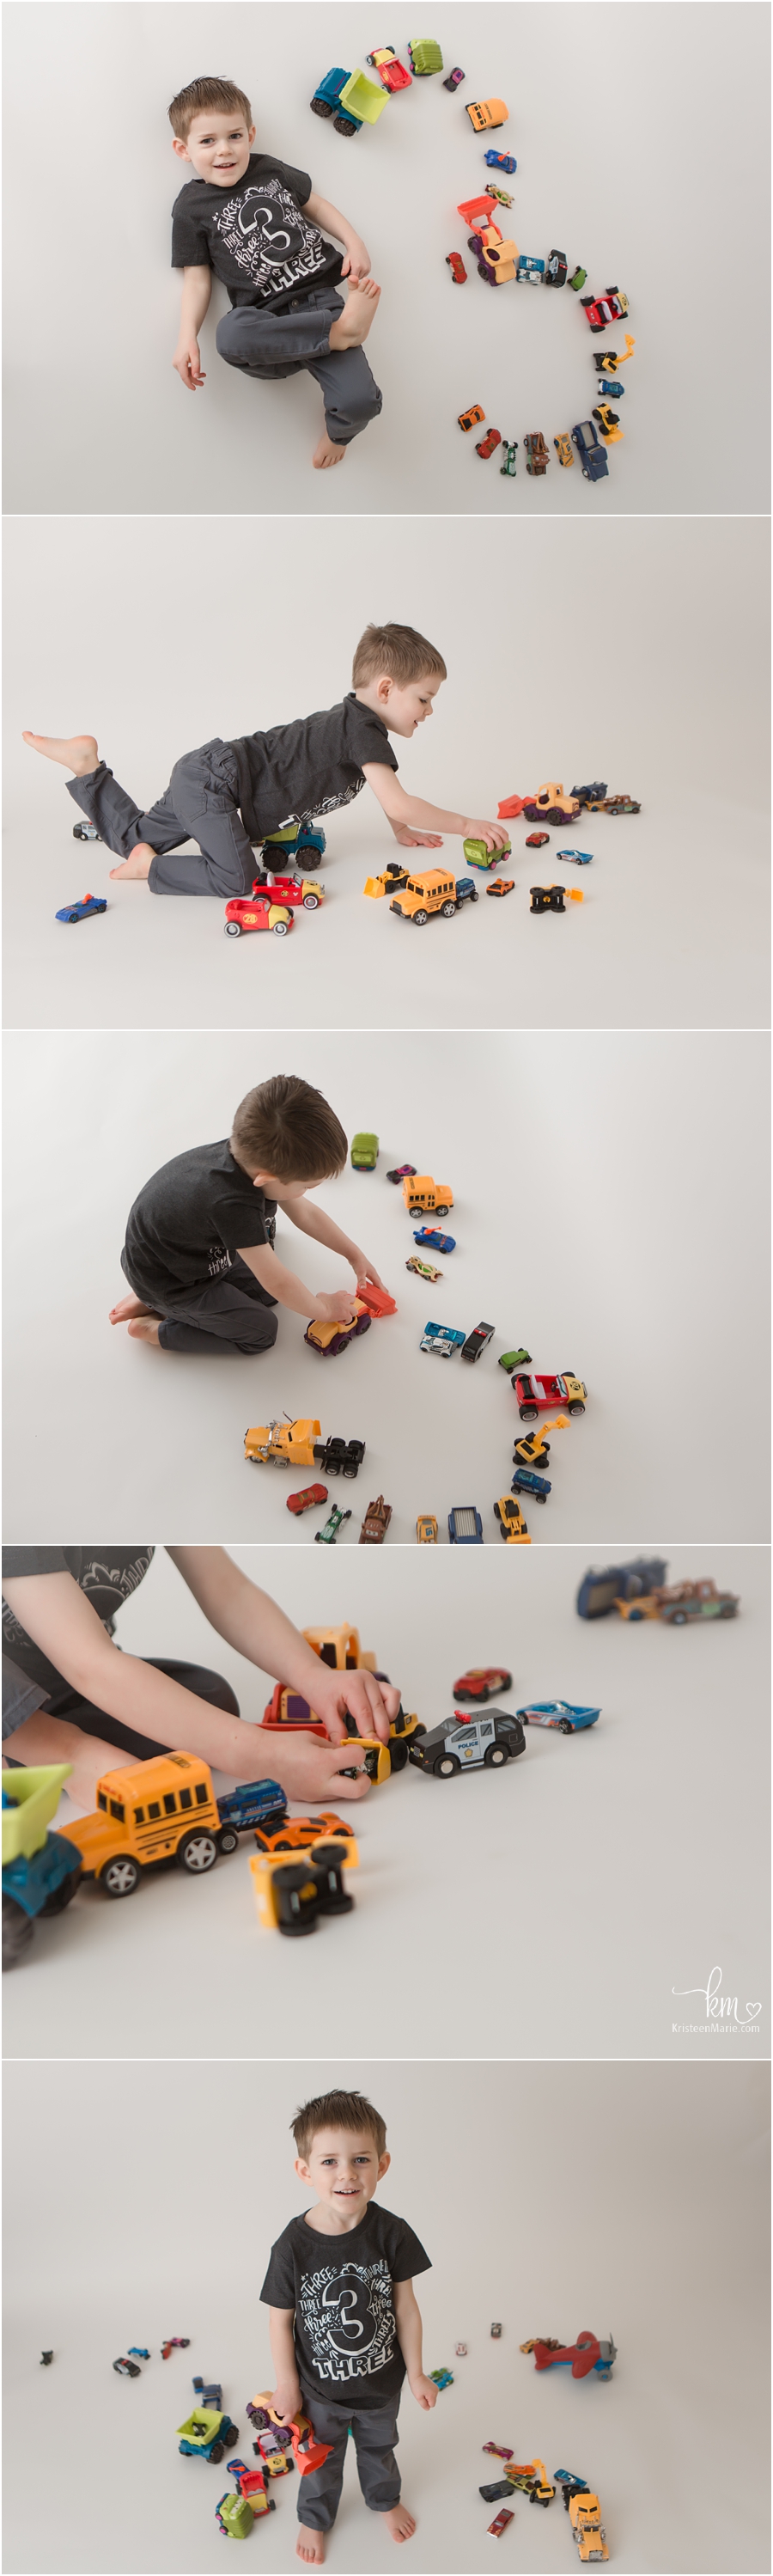 Three year old boy pictures - car themed